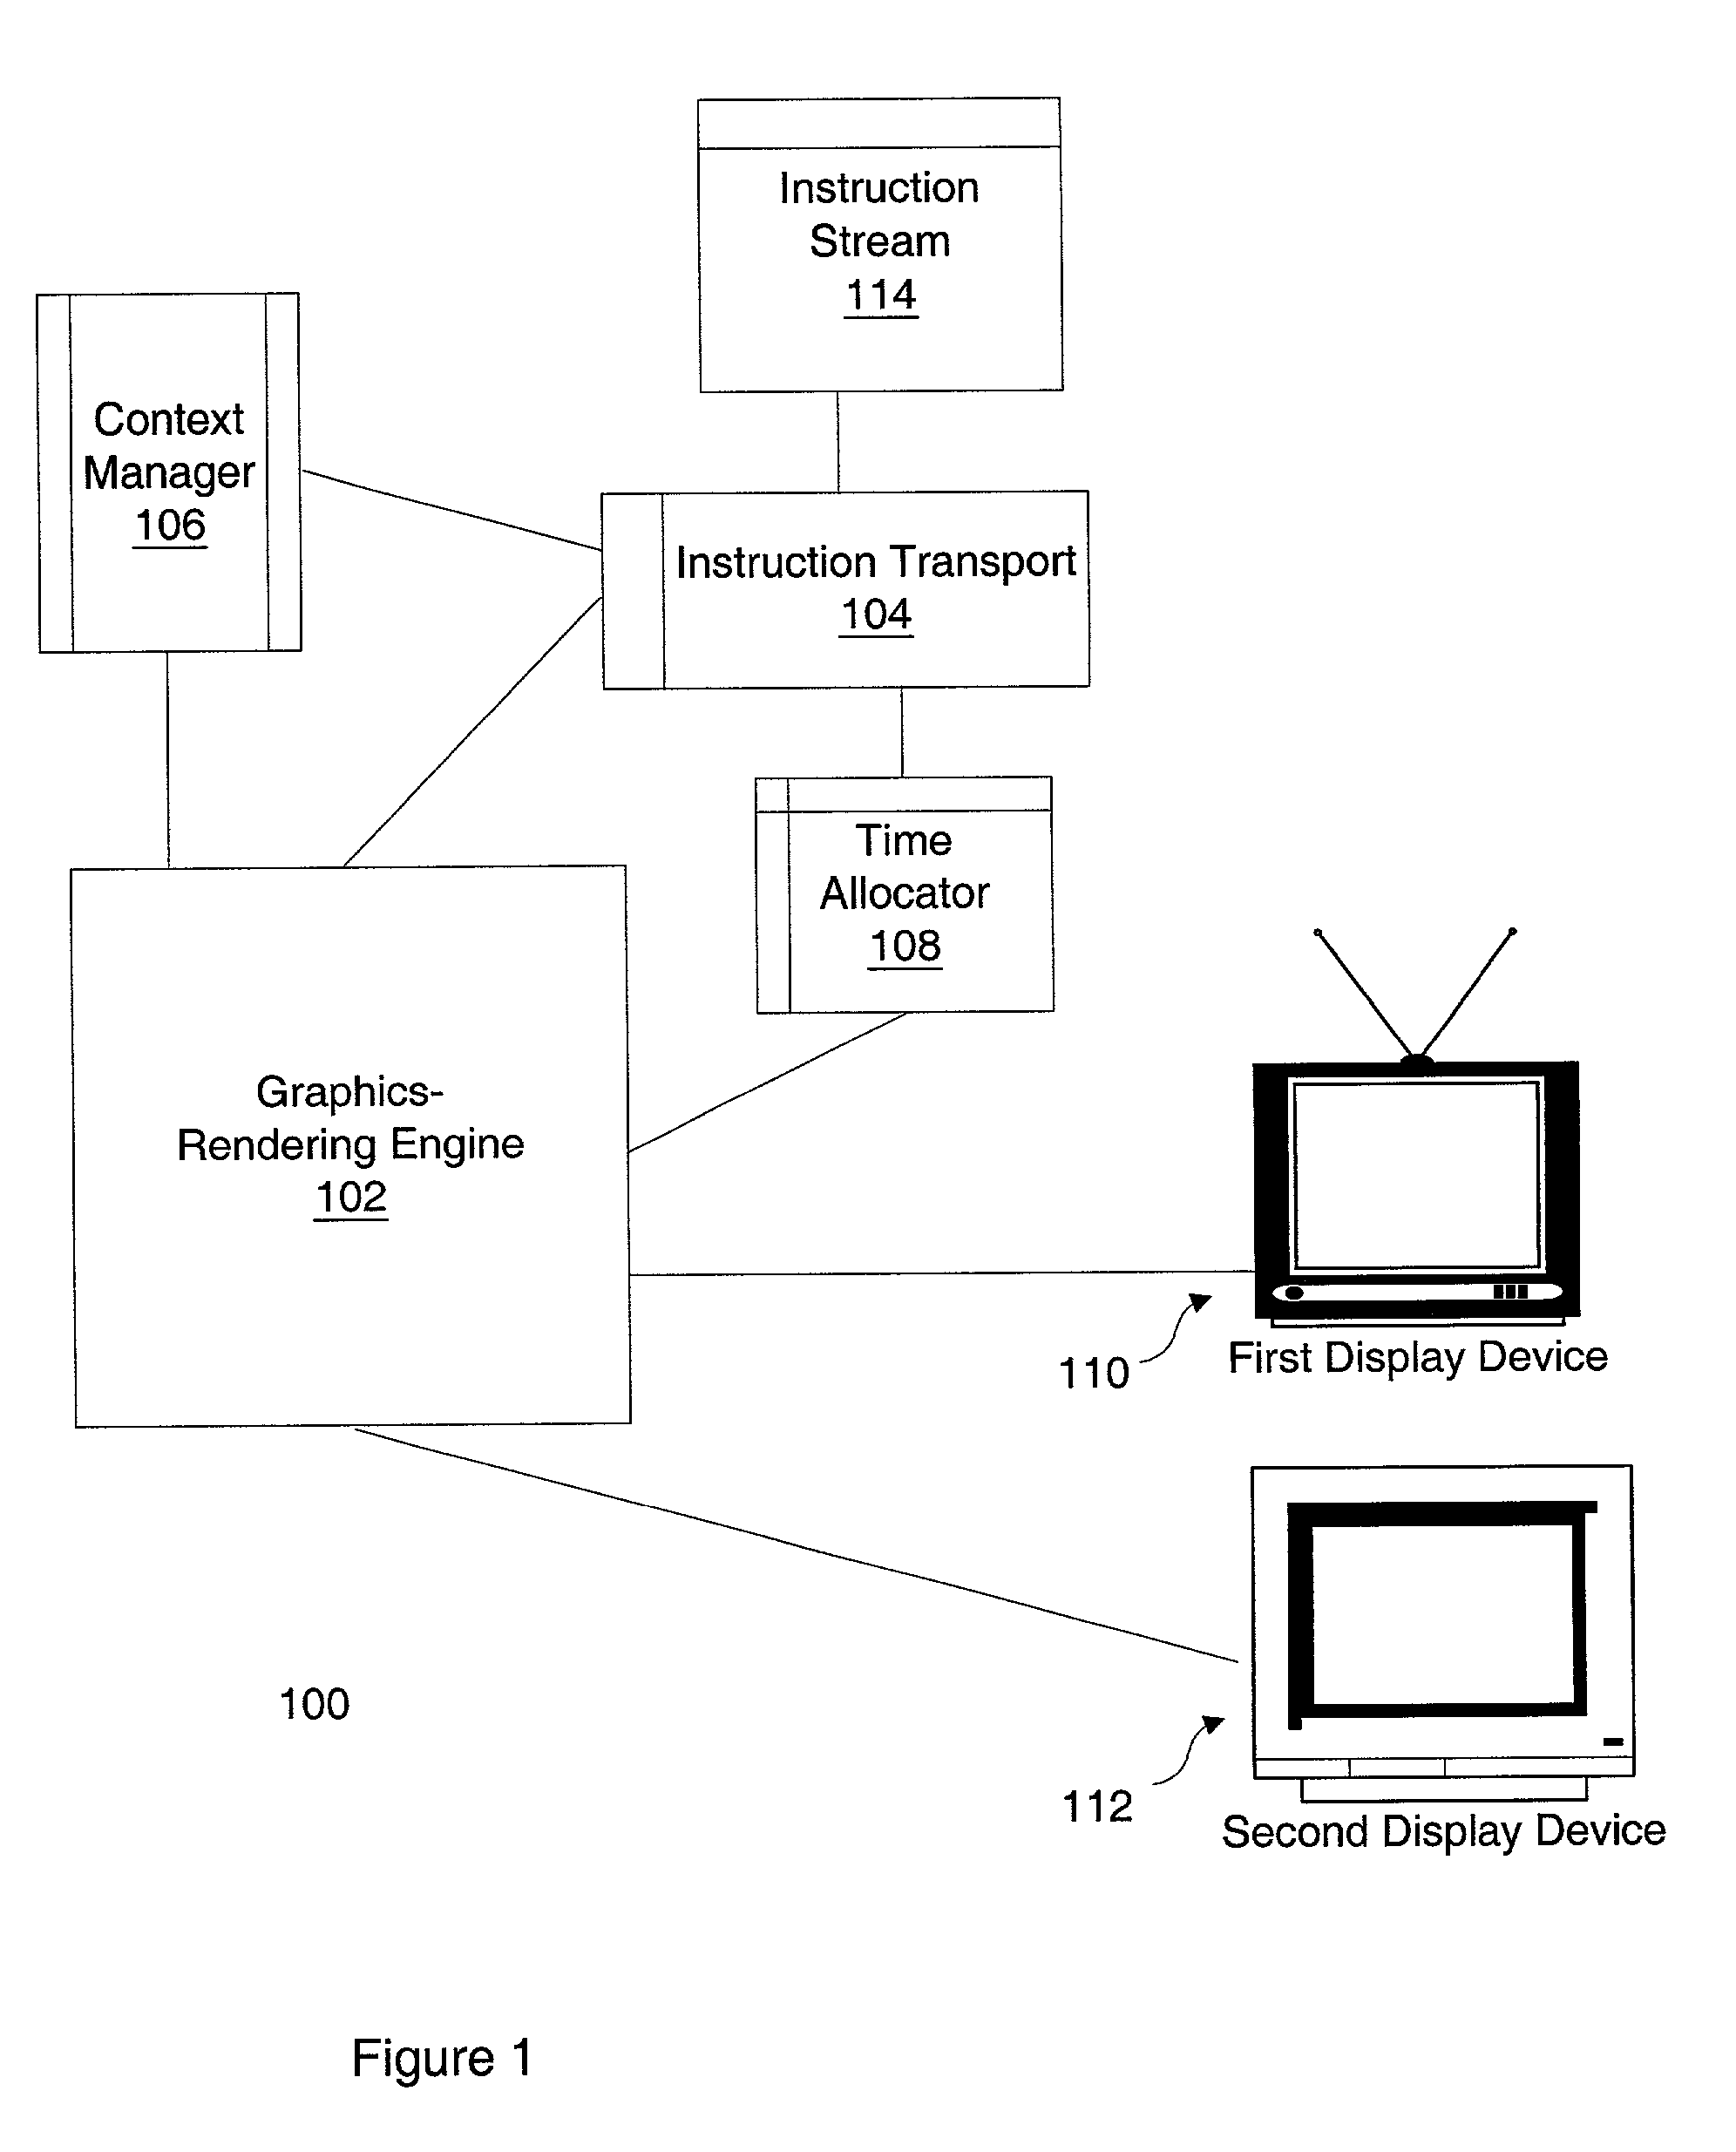 Apparatus, method and system with a graphics-rendering engine having a graphics context manager